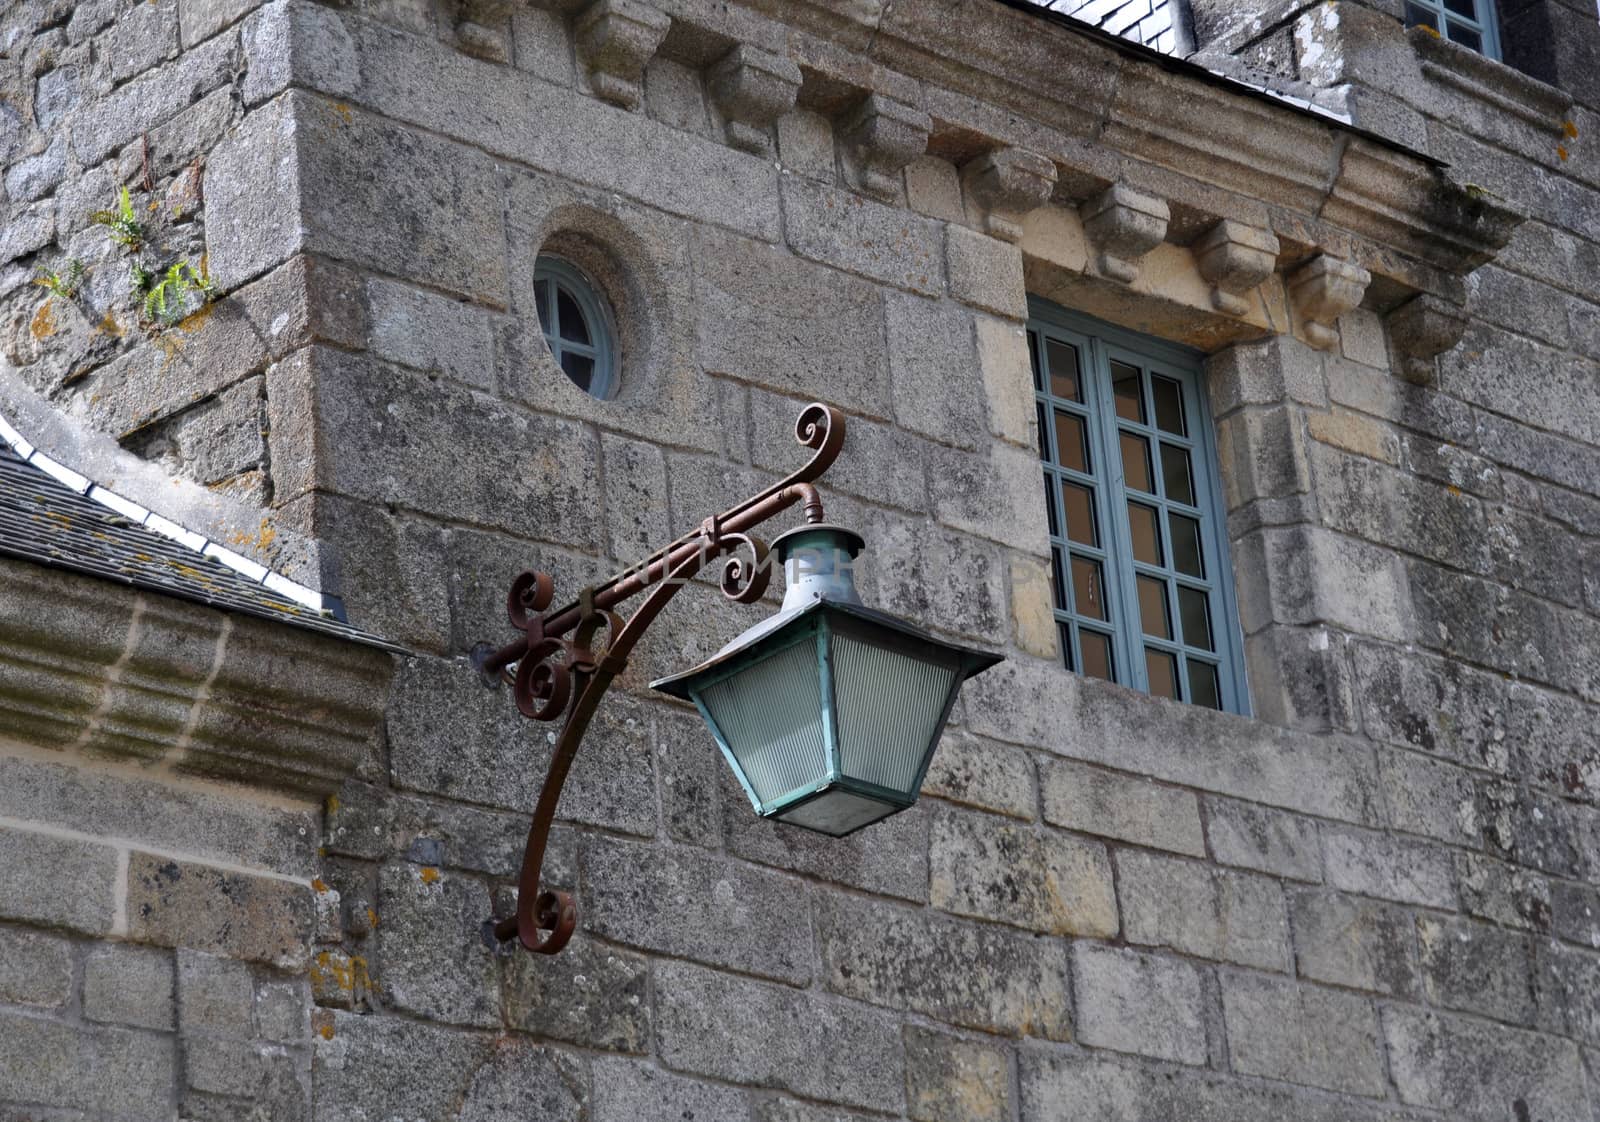 Old lamp in Locronan, Brittany, France.